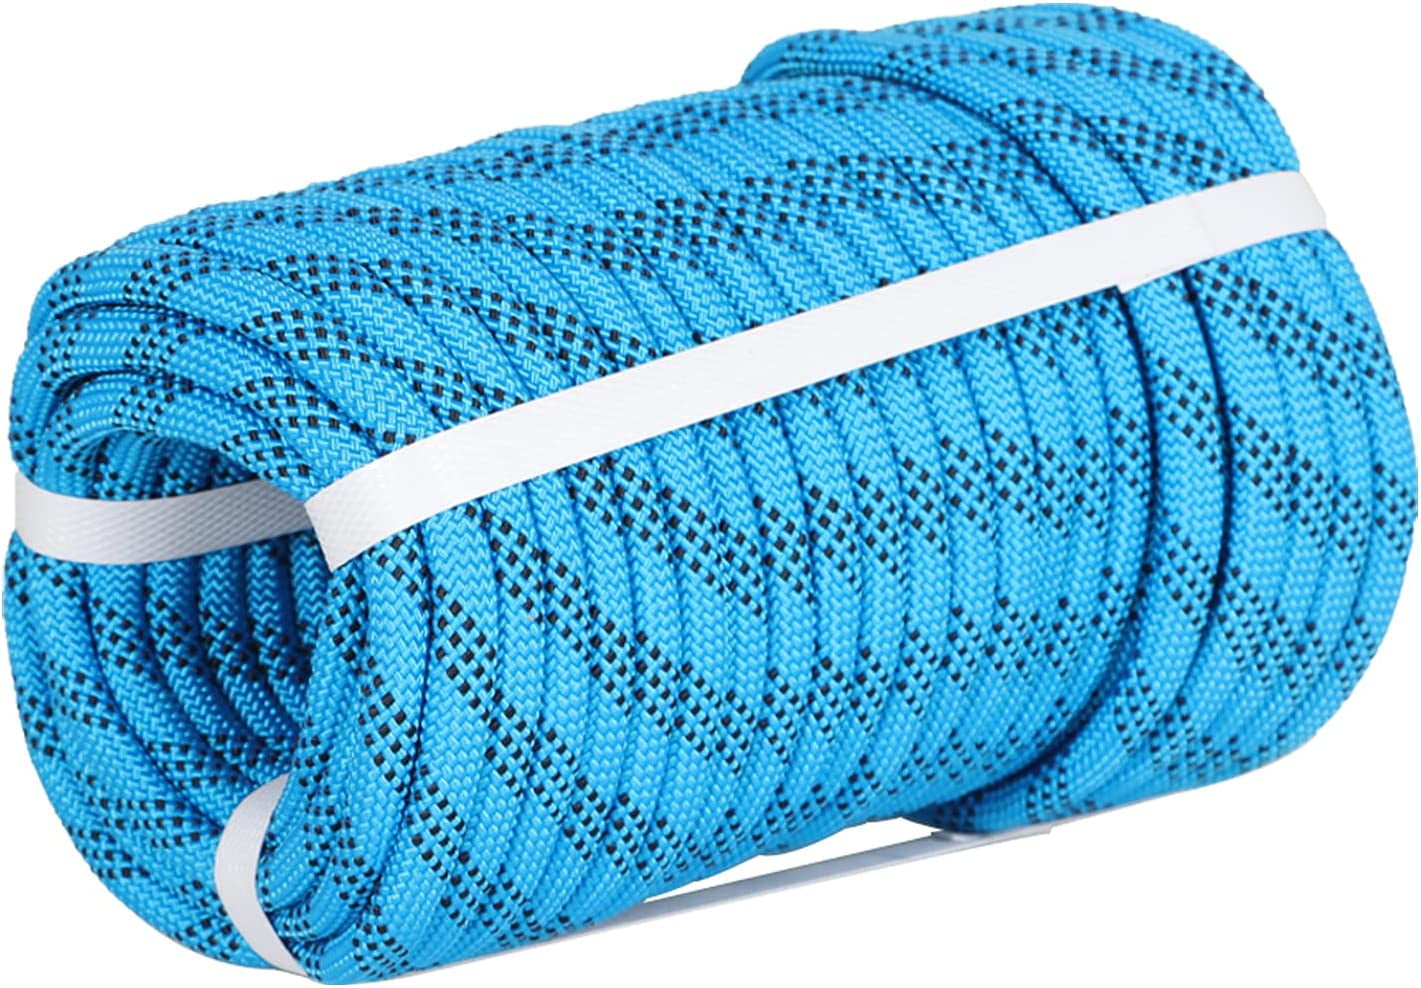 hostic High Force Braided Polyester Rope, Arborist Rigging Rope